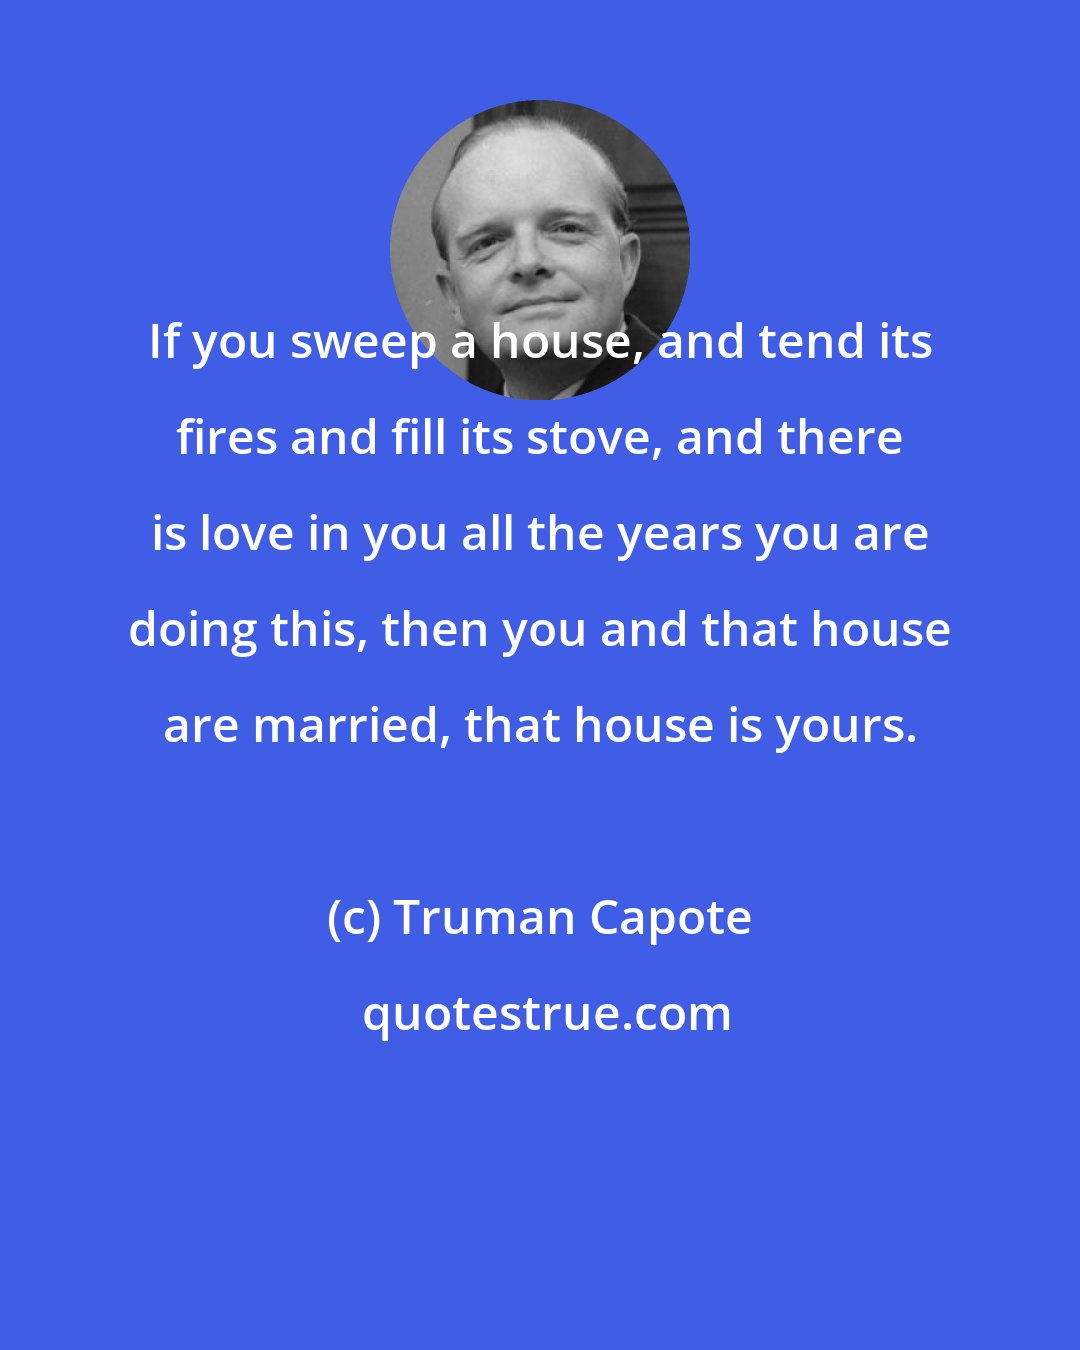 Truman Capote: If you sweep a house, and tend its fires and fill its stove, and there is love in you all the years you are doing this, then you and that house are married, that house is yours.